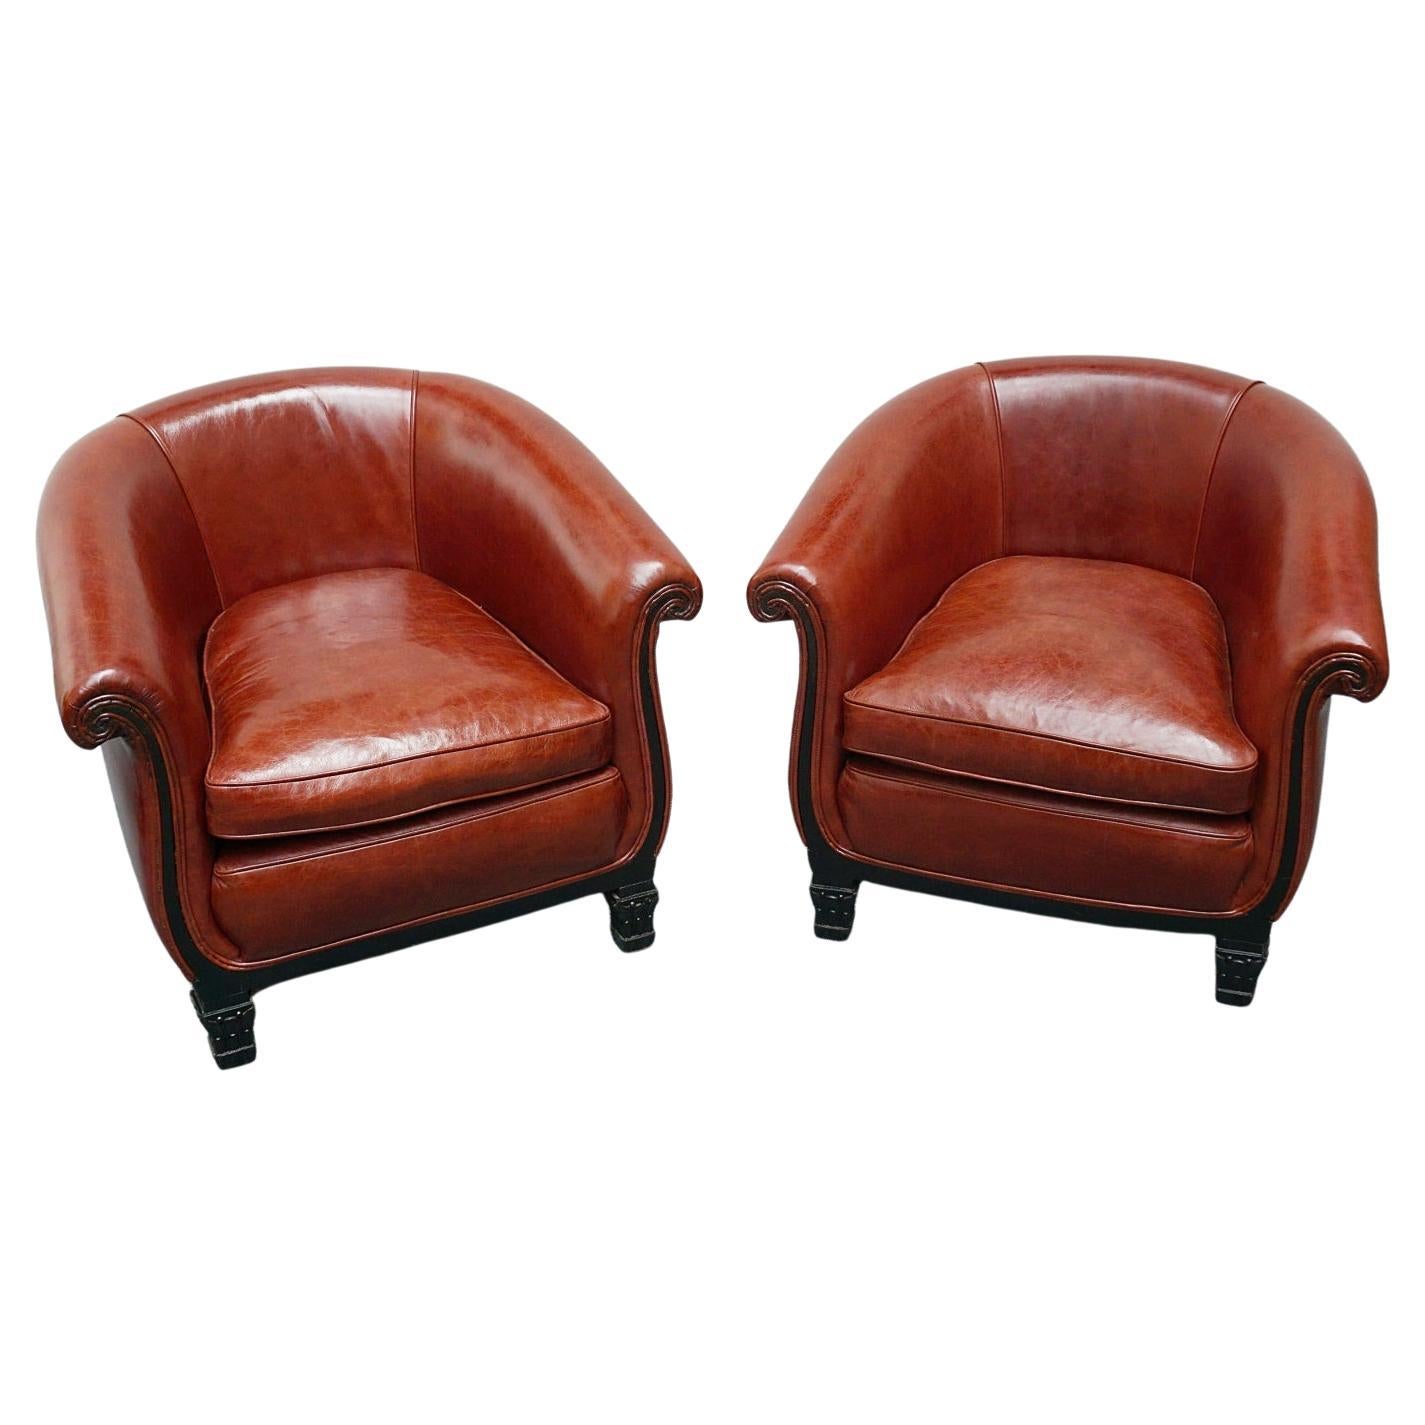 Pair of French Art Deco Club Chairs Re-Upholstered in Chestnut Leather